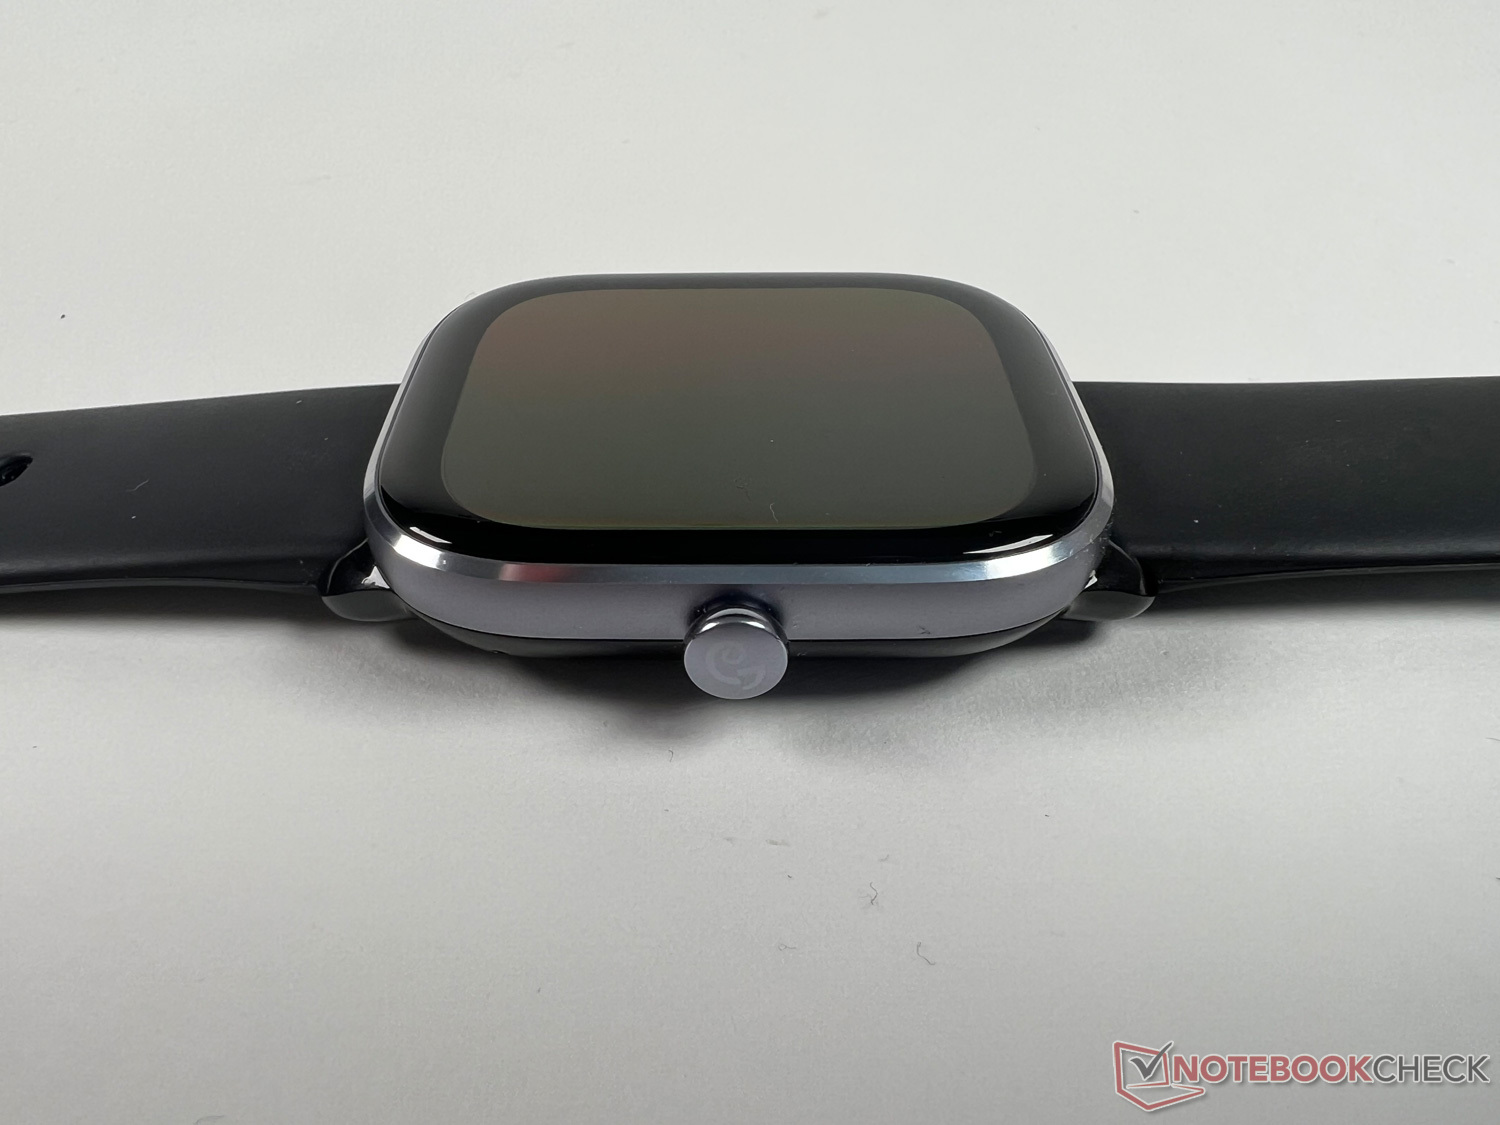 Amazfit GTS 4 Mini arrives with a light and ultra-slim body -   news